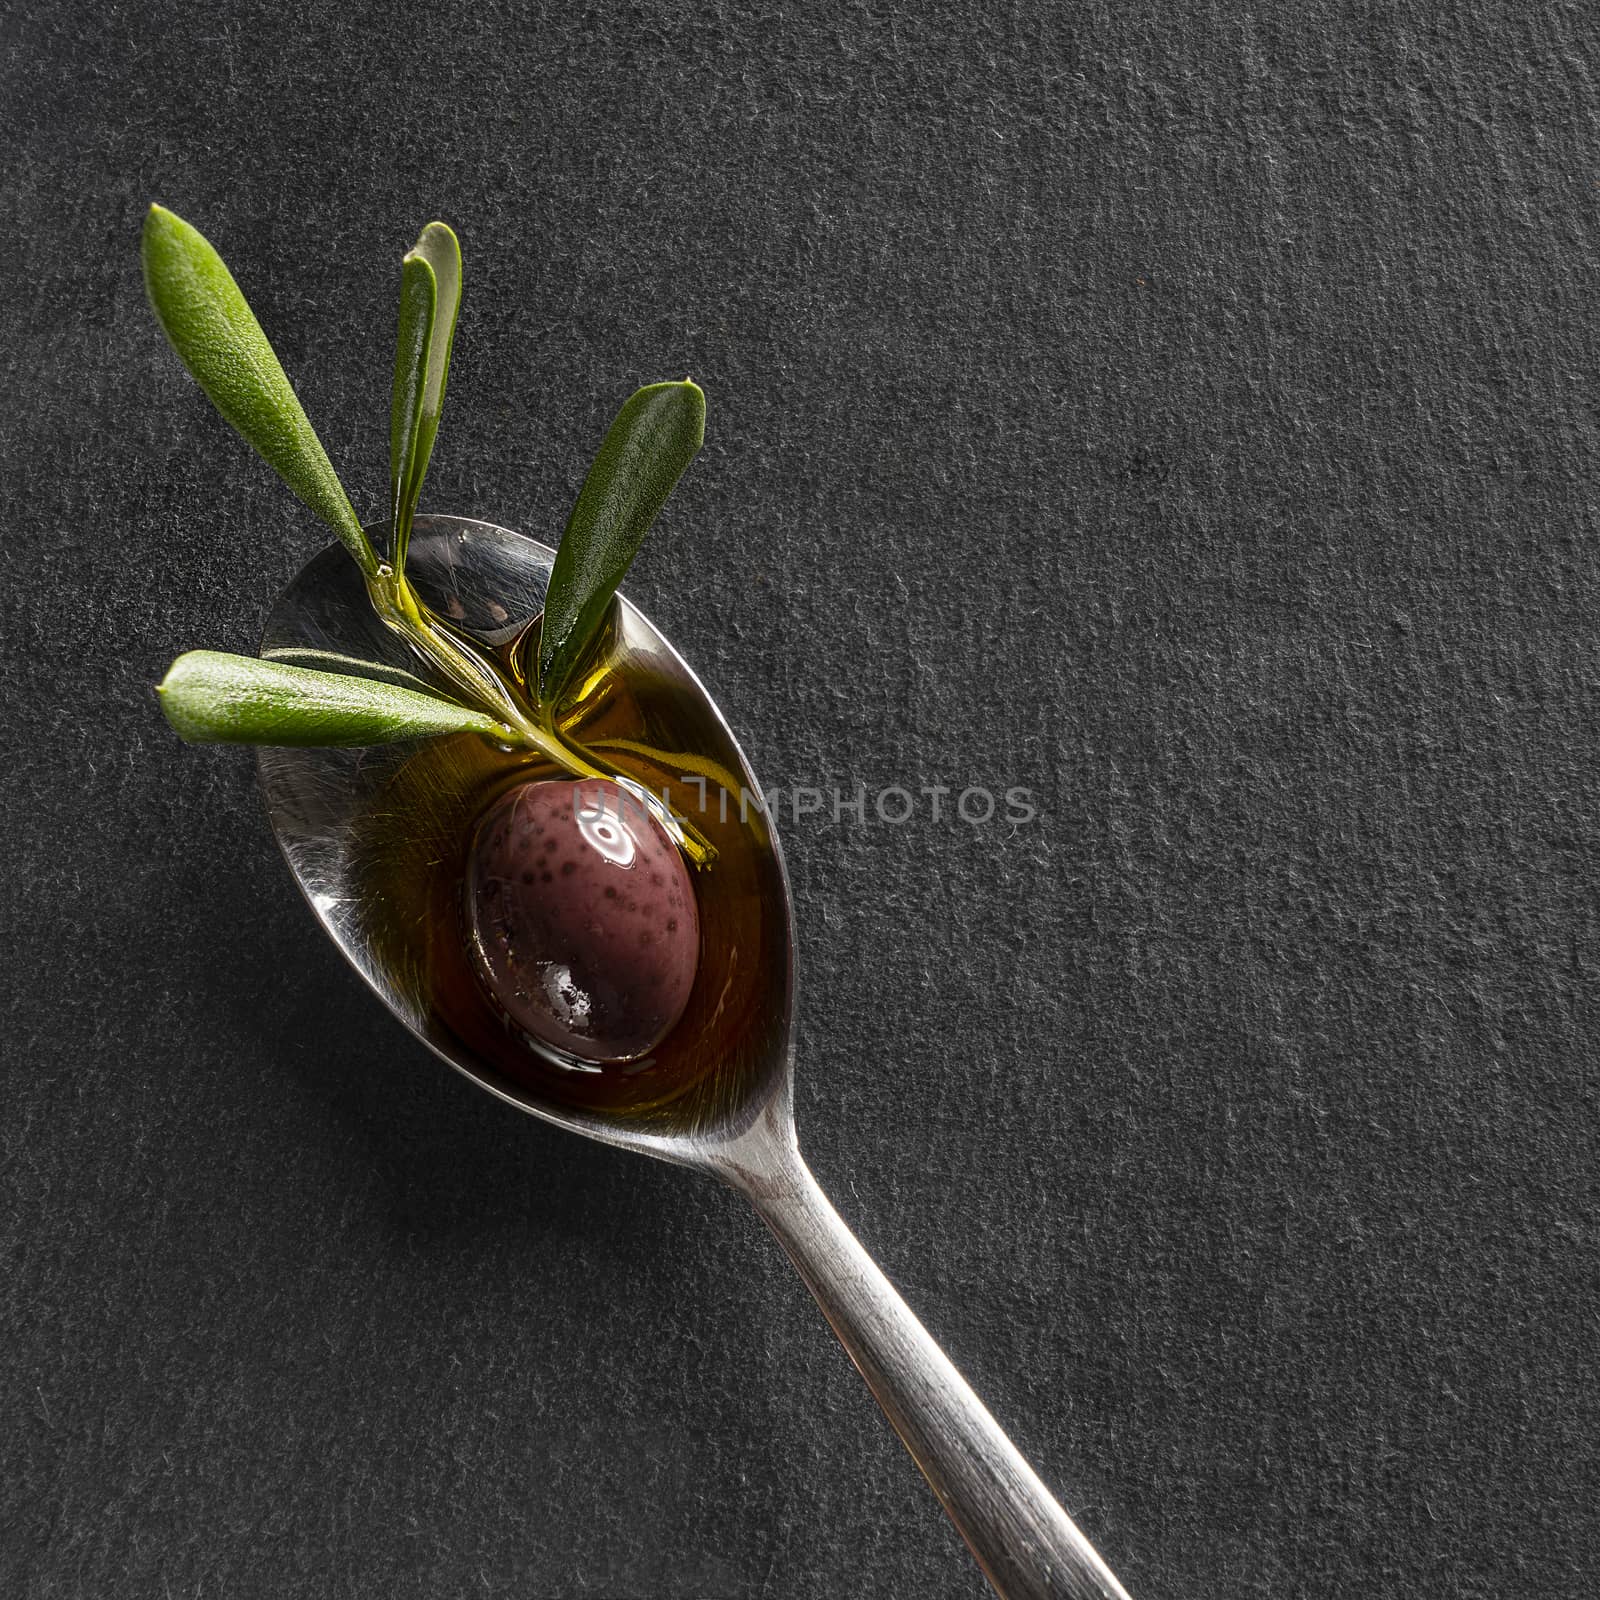 A black olive in the spoon with a black sytone